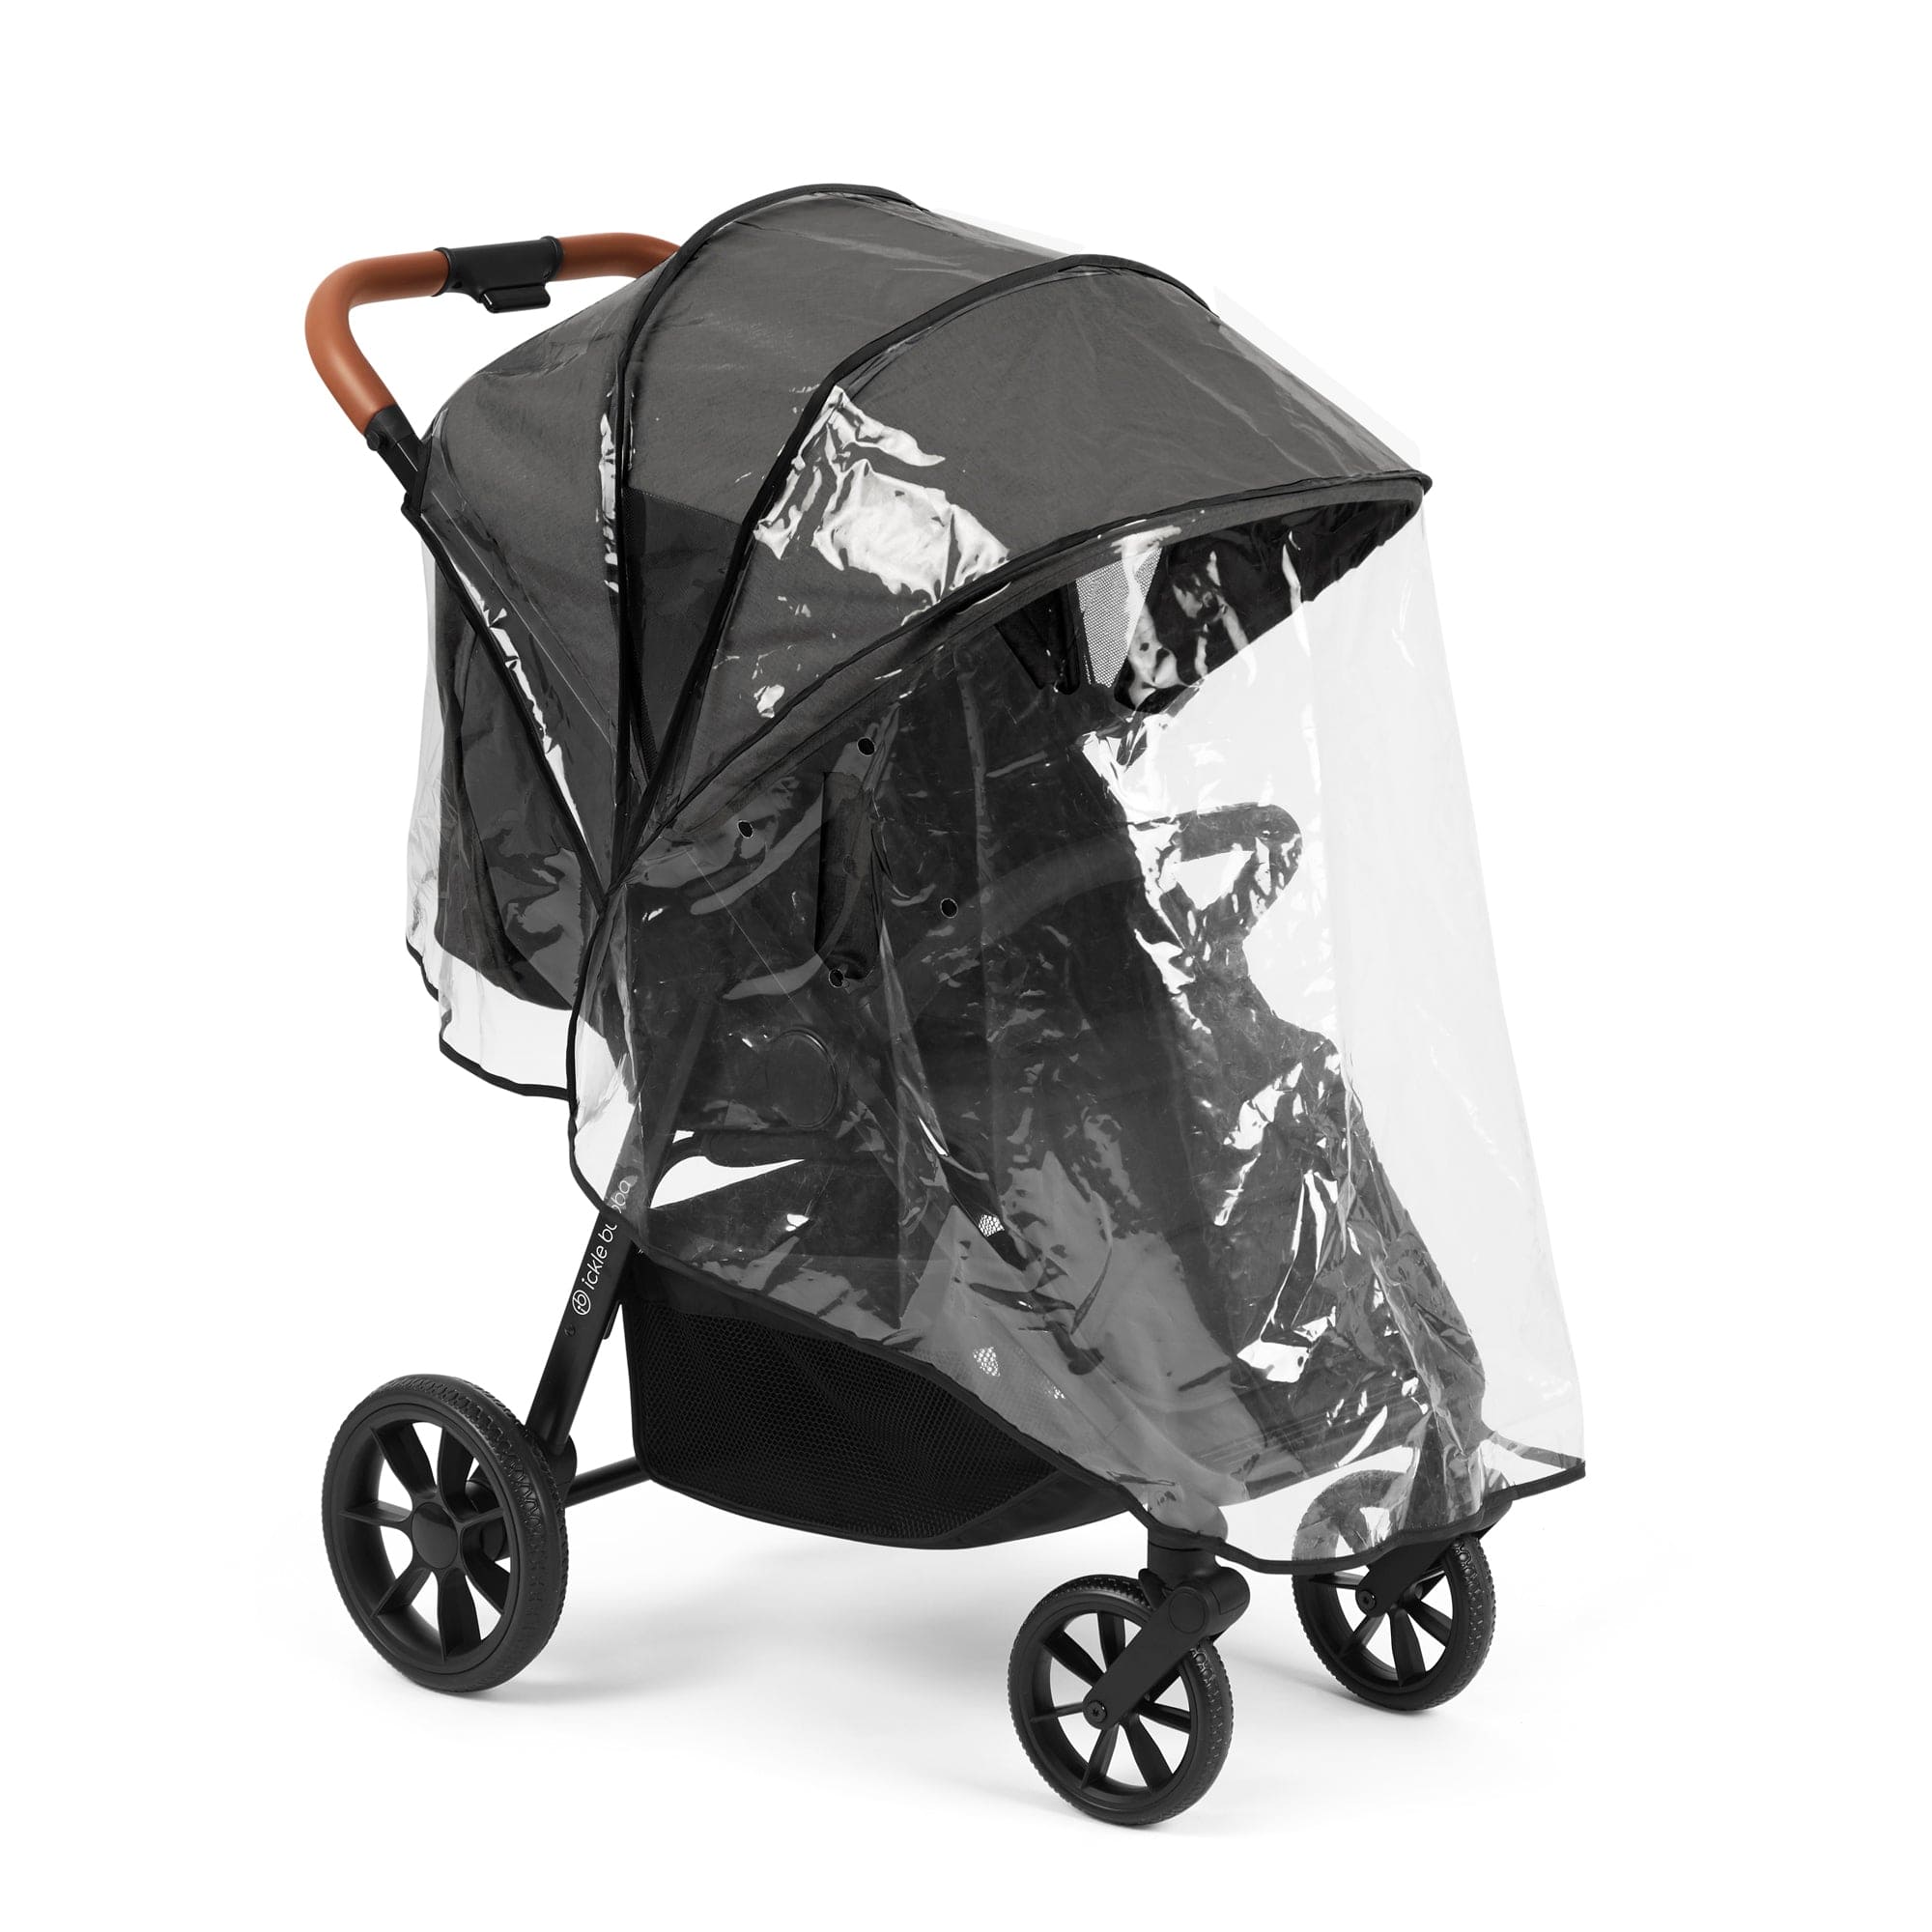 STOMP STRIDE STROLLER - CHARCOAL GREY Pushchairs & Buggies 15-006-100-148 5056515033823